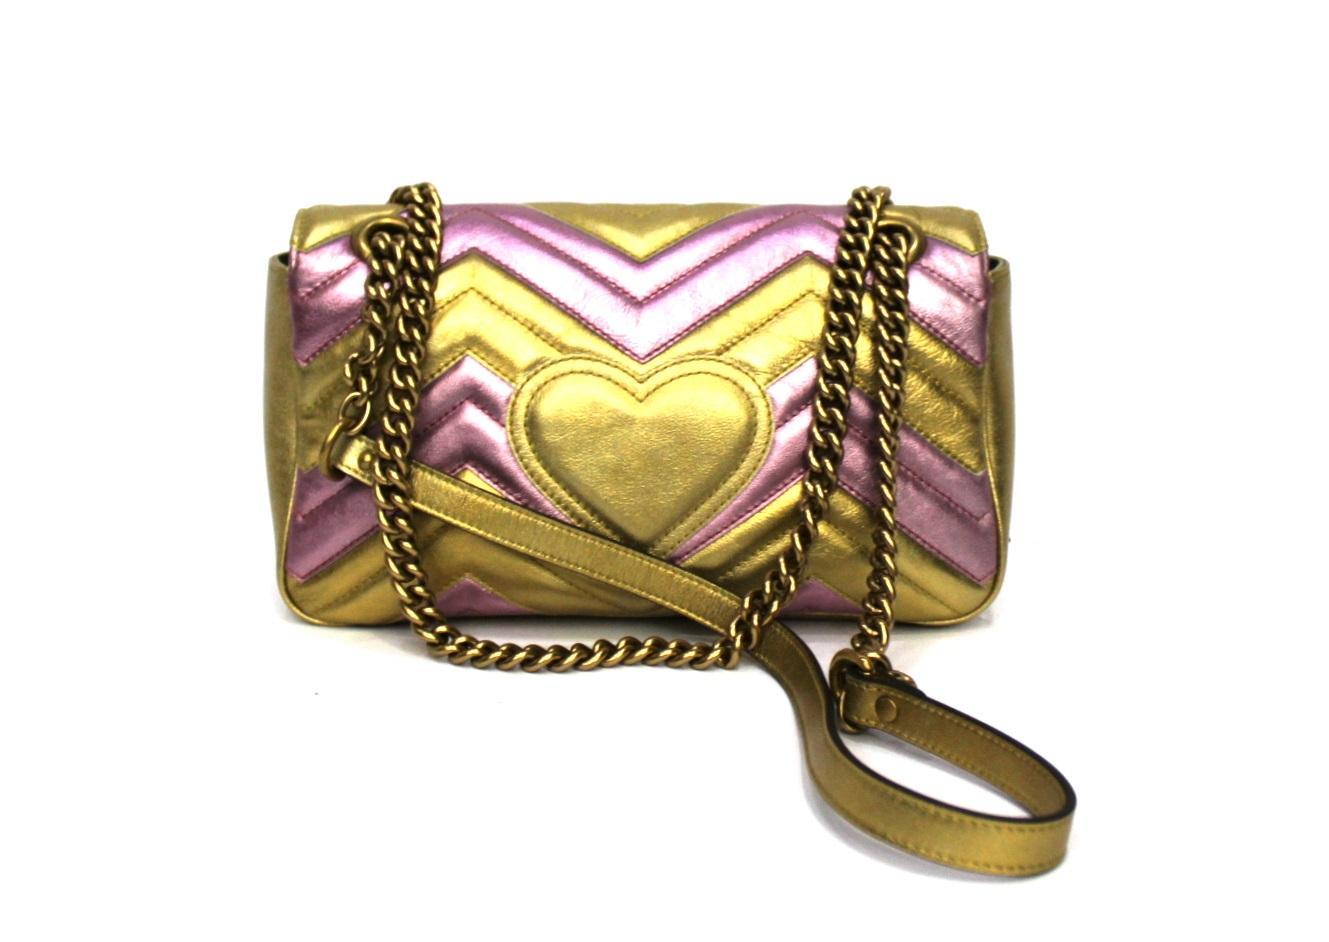 Gucci Marmont line bag in multicolor leather. Hook closure, leather shoulder strap and chain.

Gilded hardware, internally capacious. The bag is in excellent condition.